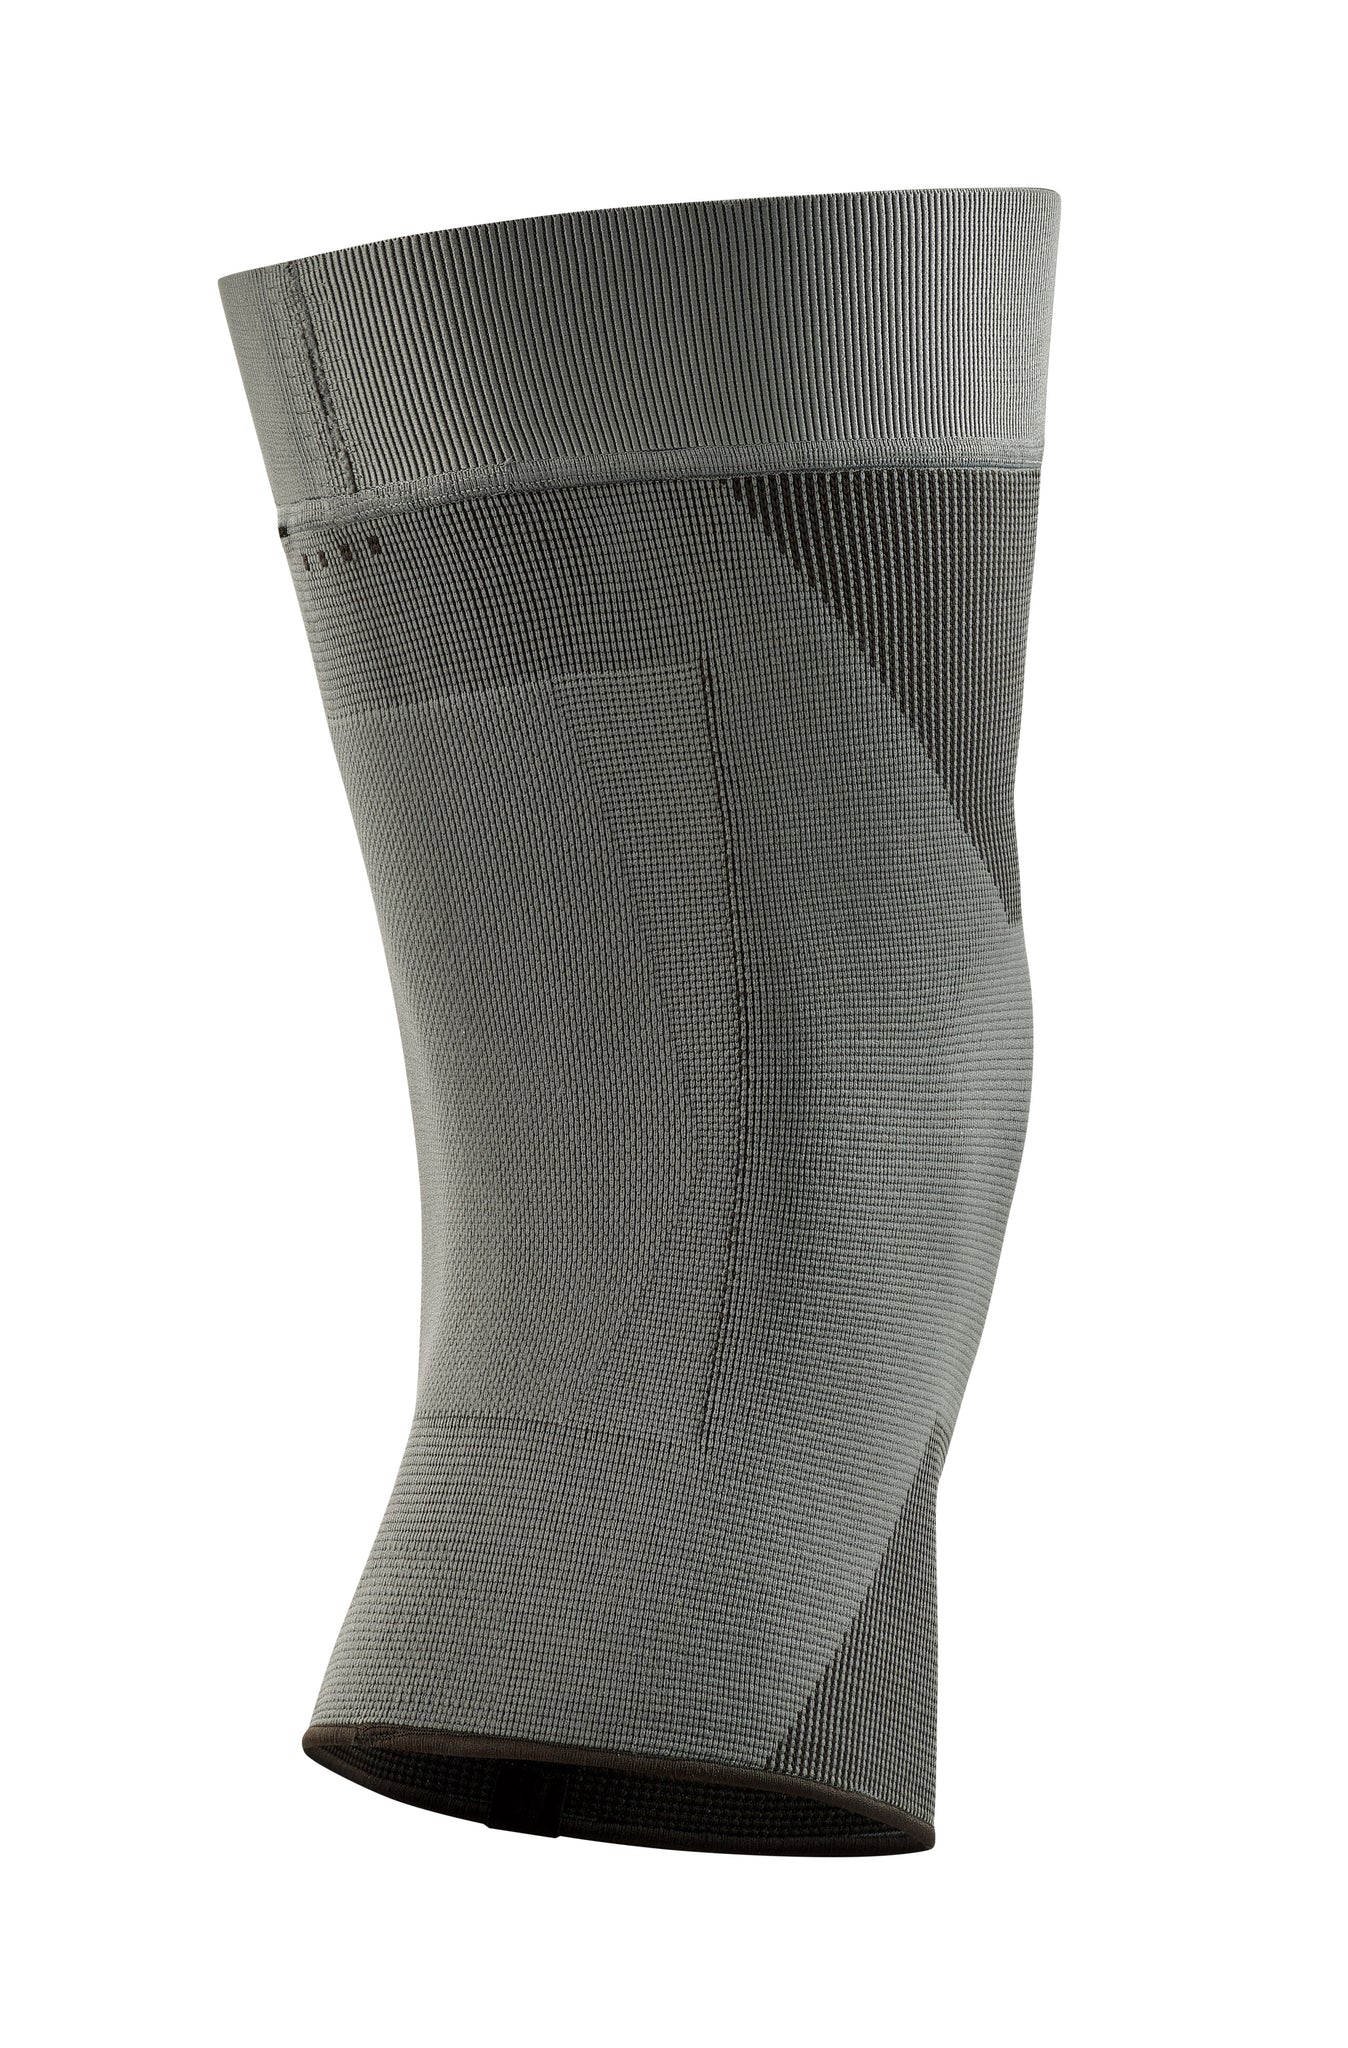 Mid & Light Support Knee Sleeve; 20-30 mmHg Compression Care